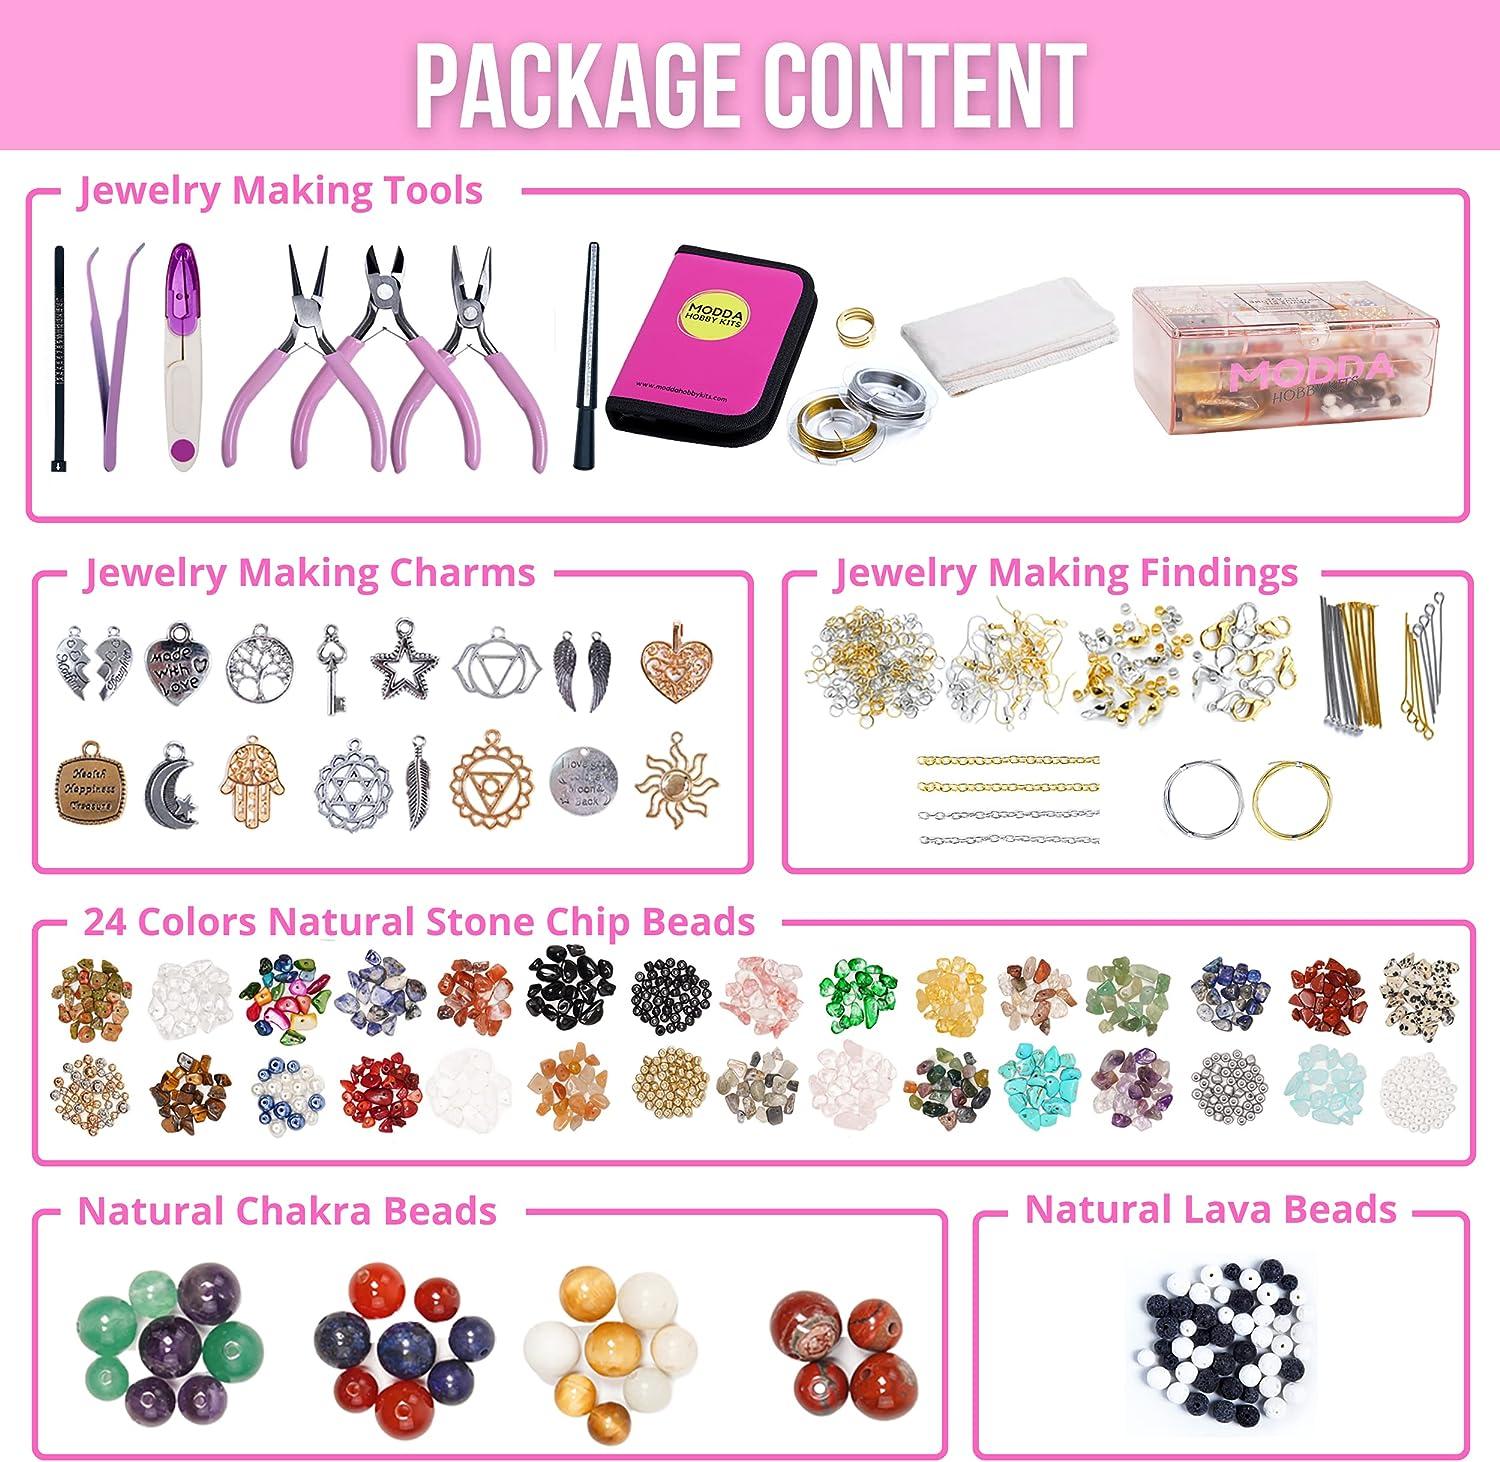 Modda Deluxe Jewelry Making Kit, Jewelry Making Supplies Includes Instructions